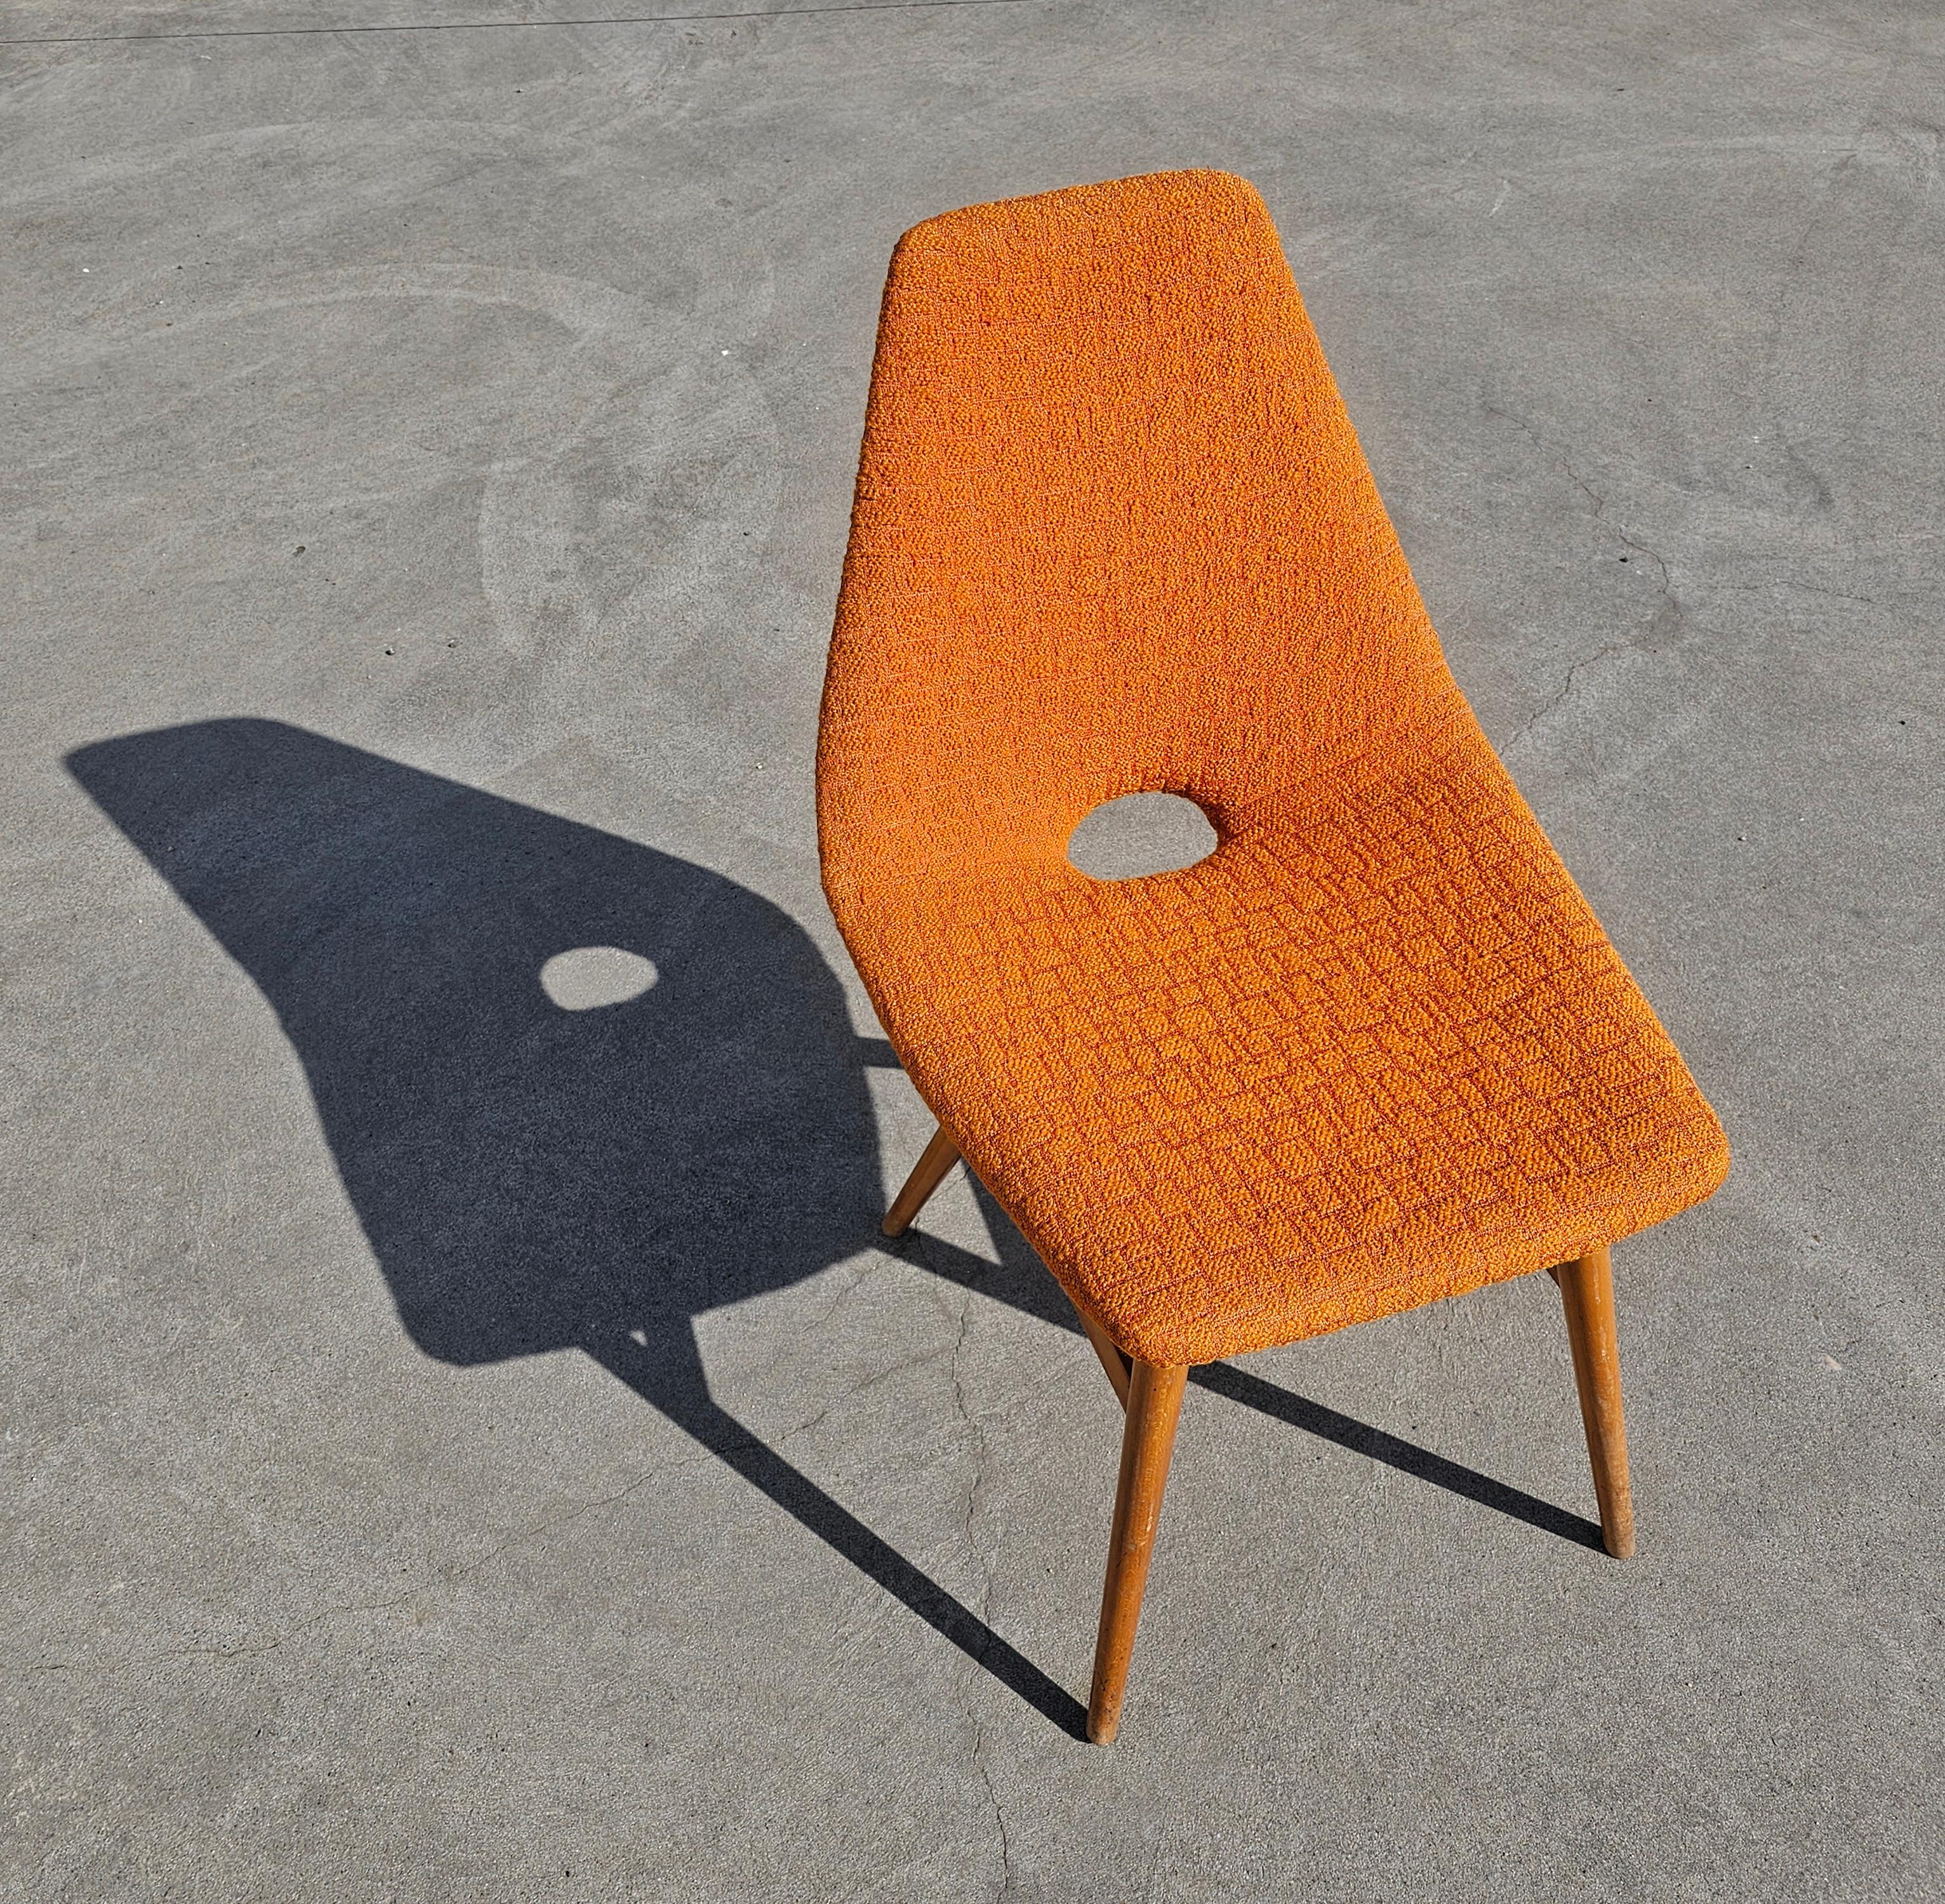 In this listing you will find a Pair of Rare and extremely attractive Mid Century Modern Chairs designed by Judit Burian and Erika Szek in vibrant orange fabric with beautiful texture, which is the original fabric the chairs we upholstered with when